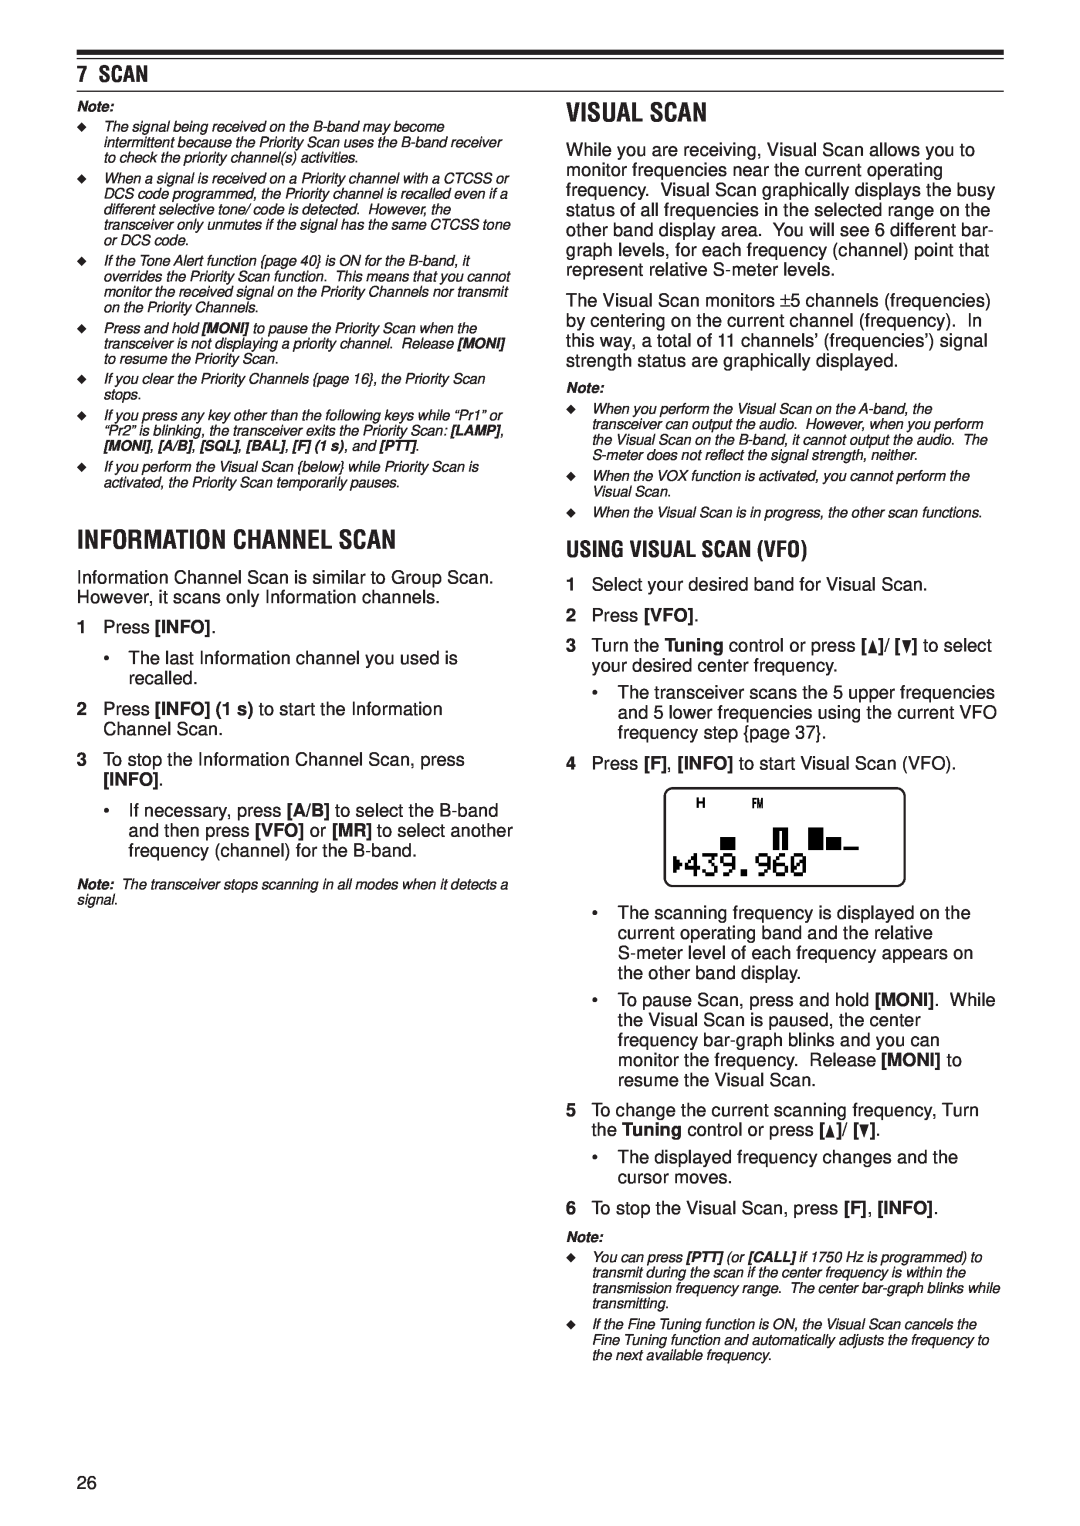 Kenwood TH-F7E, TH-F6A instruction manual Information Channel Scan, Using Visual Scan Vfo 